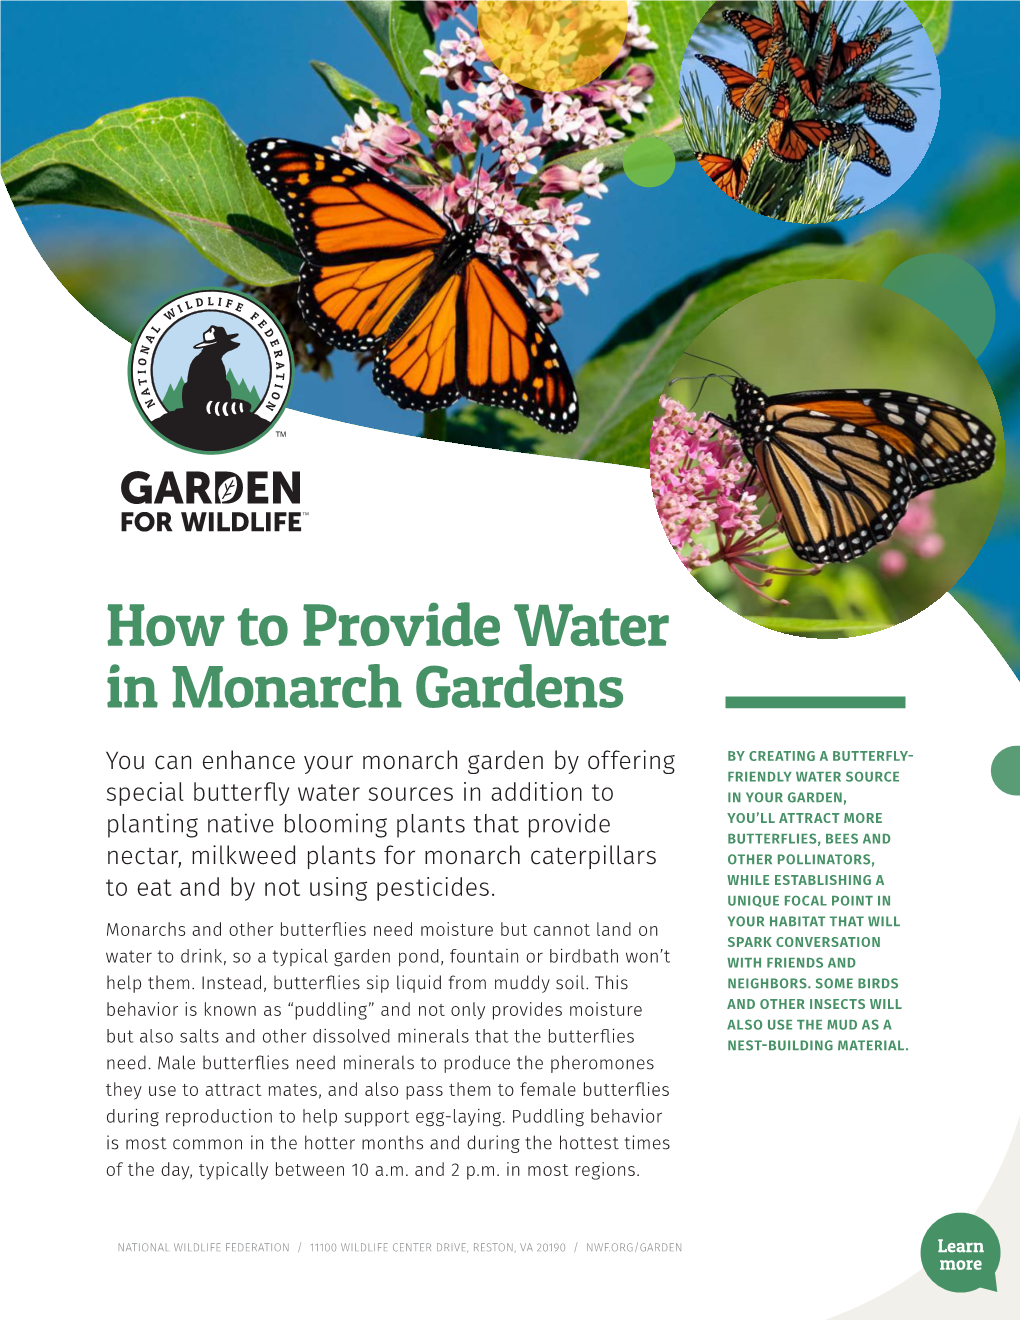 How to Provide Water in Butterfly Gardens